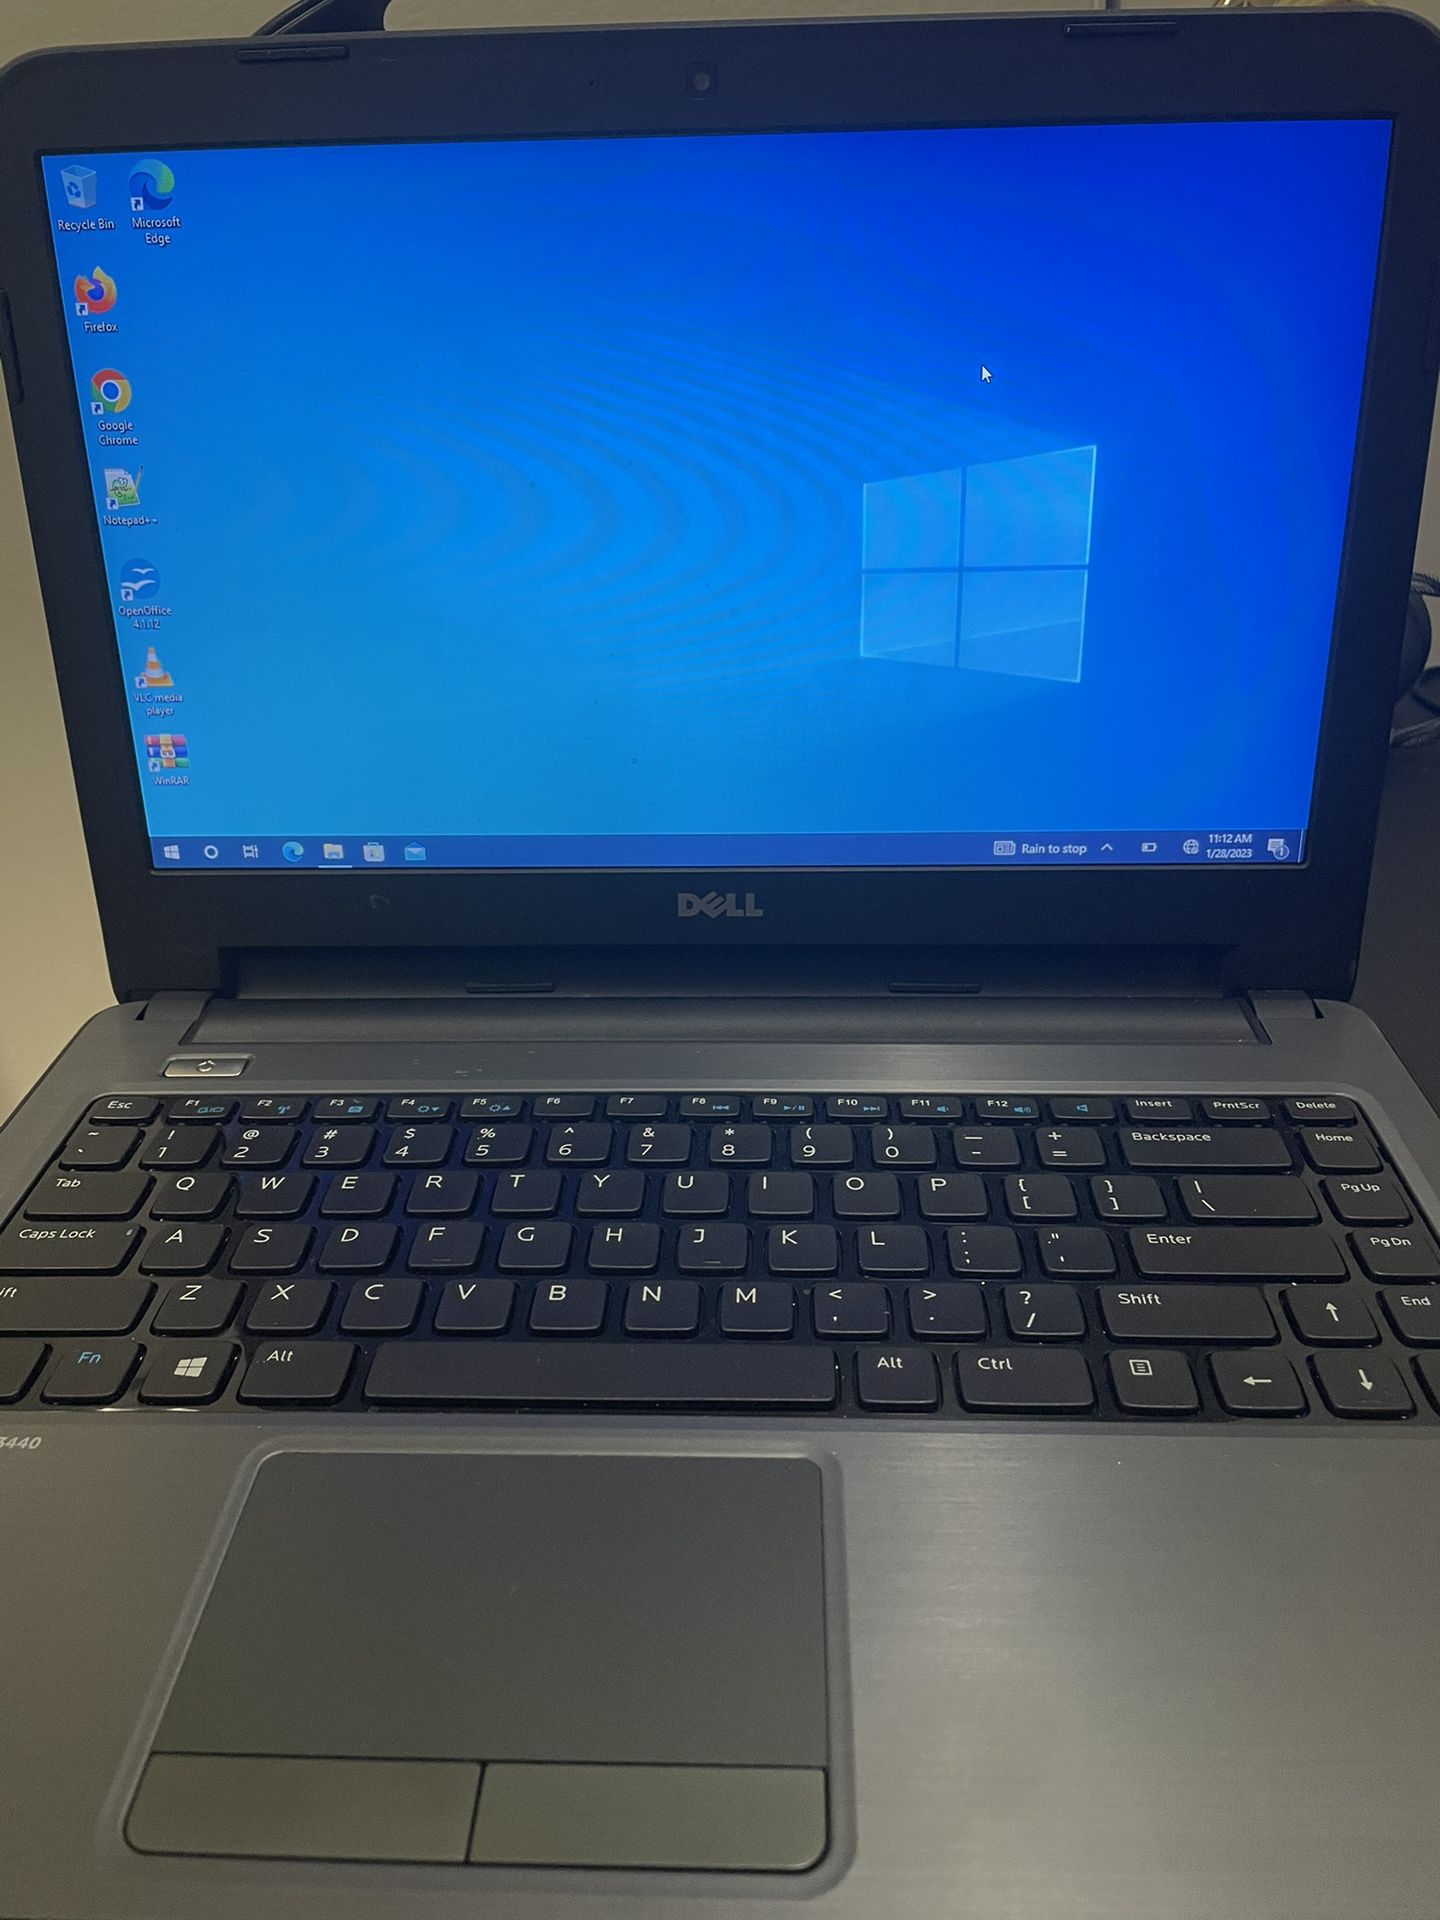 I Am Selling My 8GB RAM Dell Laptop For Cheap! for Sale in North Bethesda,  MD - OfferUp